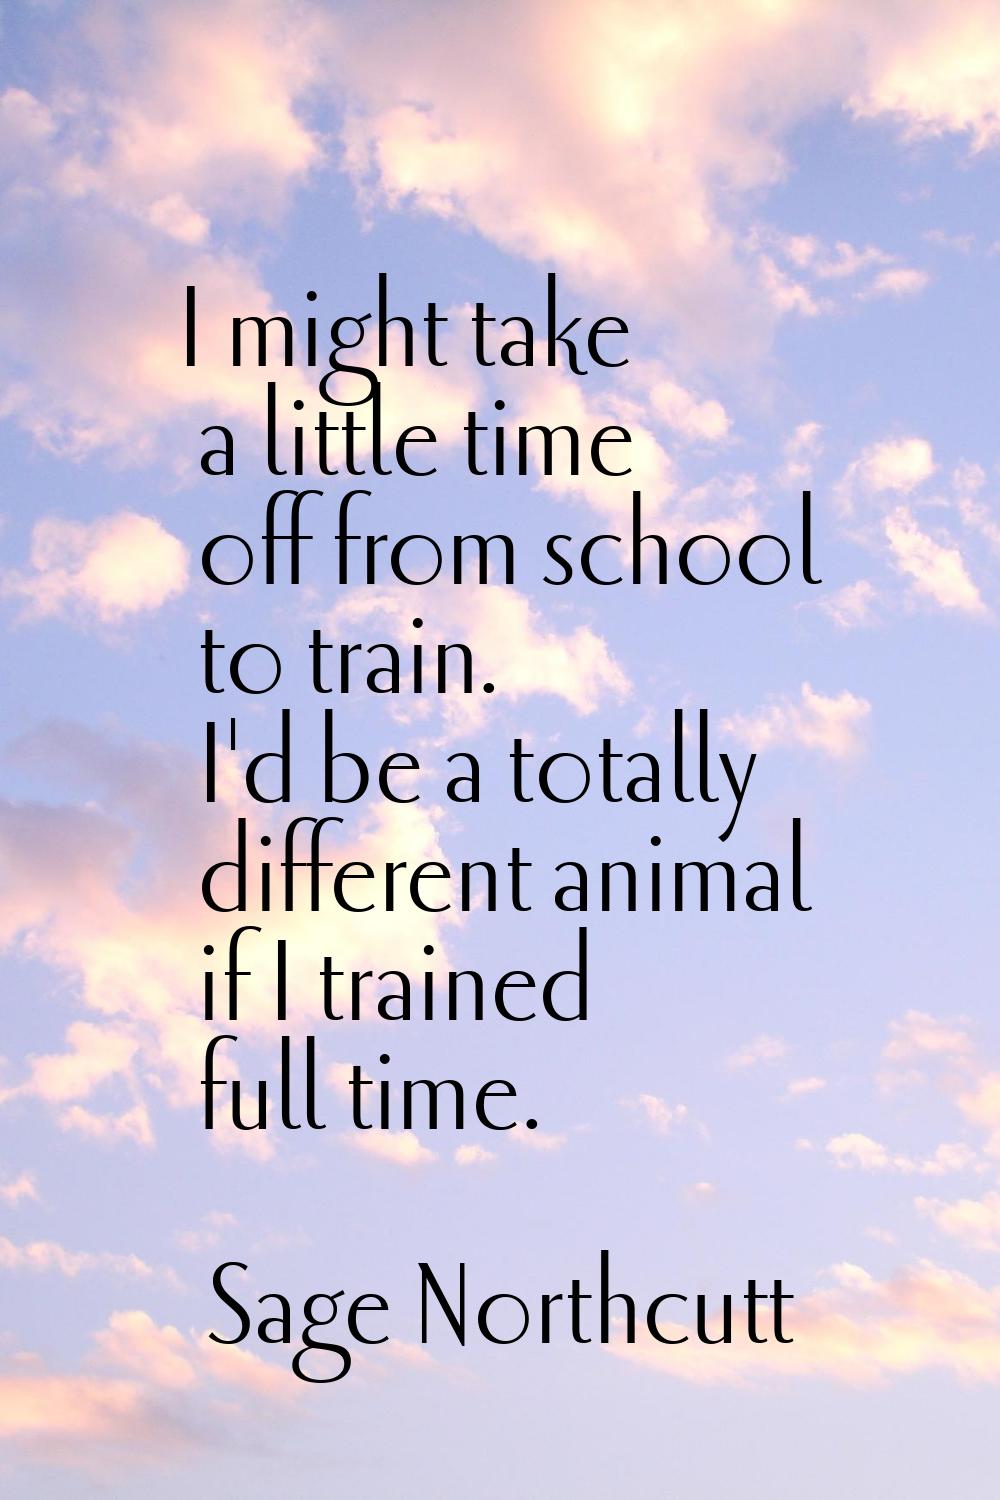 I might take a little time off from school to train. I'd be a totally different animal if I trained